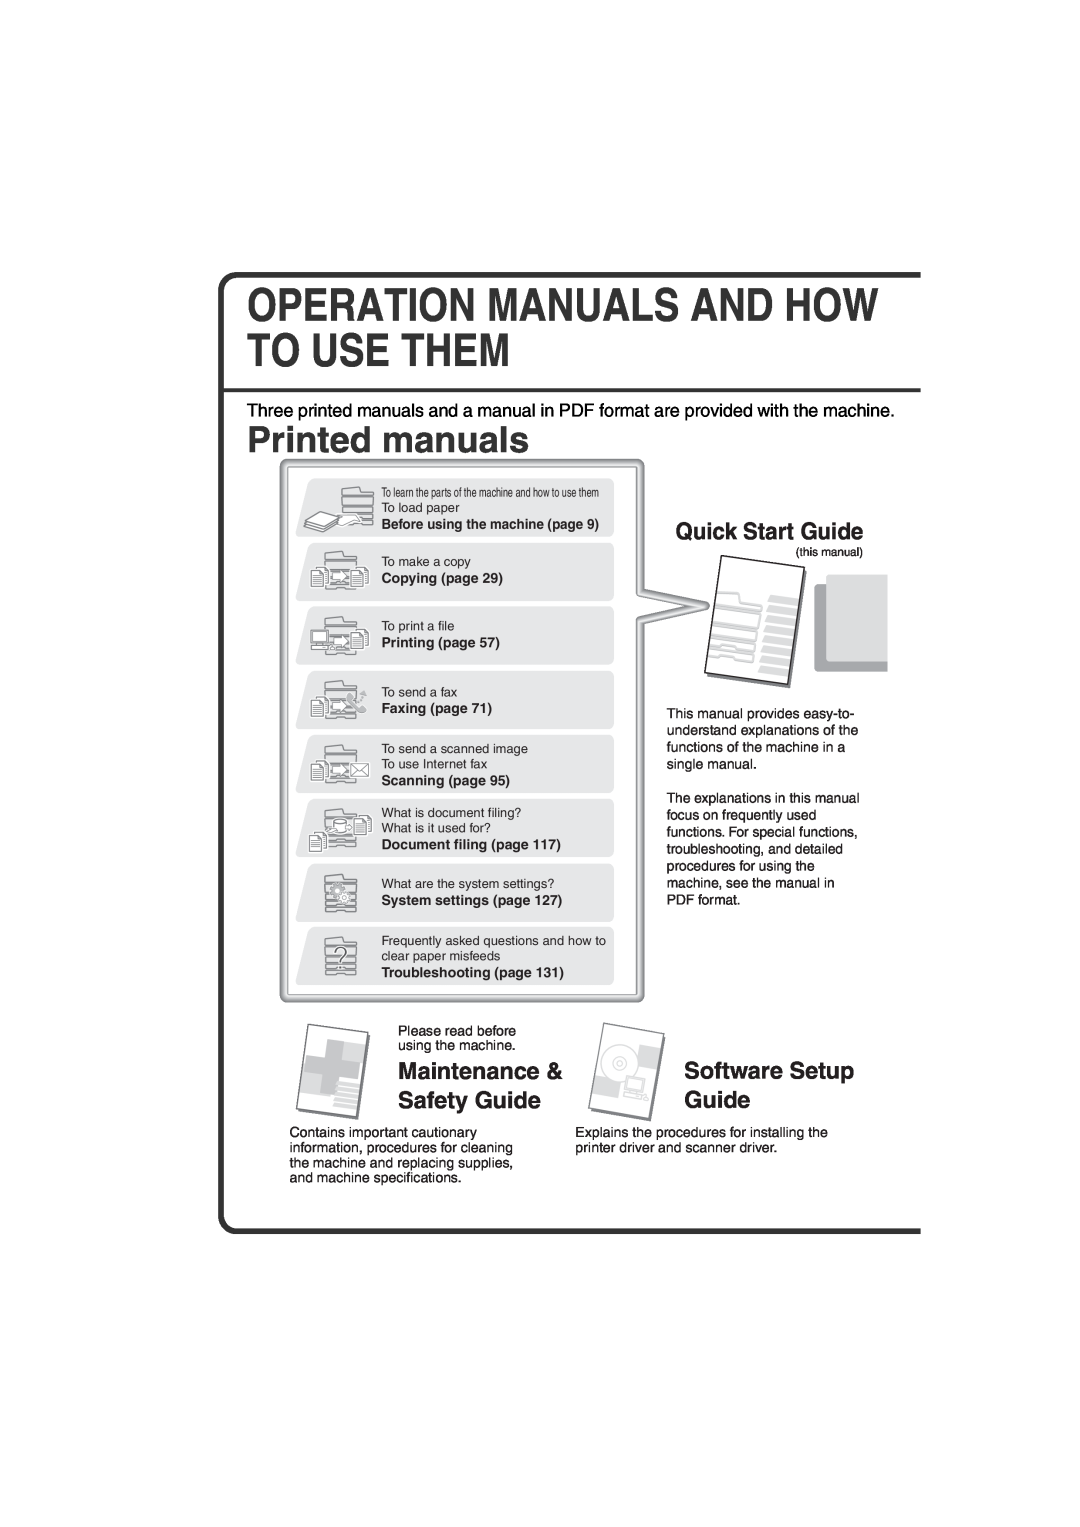 Sharp MX-B401 quick start Printed manuals, Maintenance Safety Guide, Quick Start Guide, Software Setup Guide, Copying page 